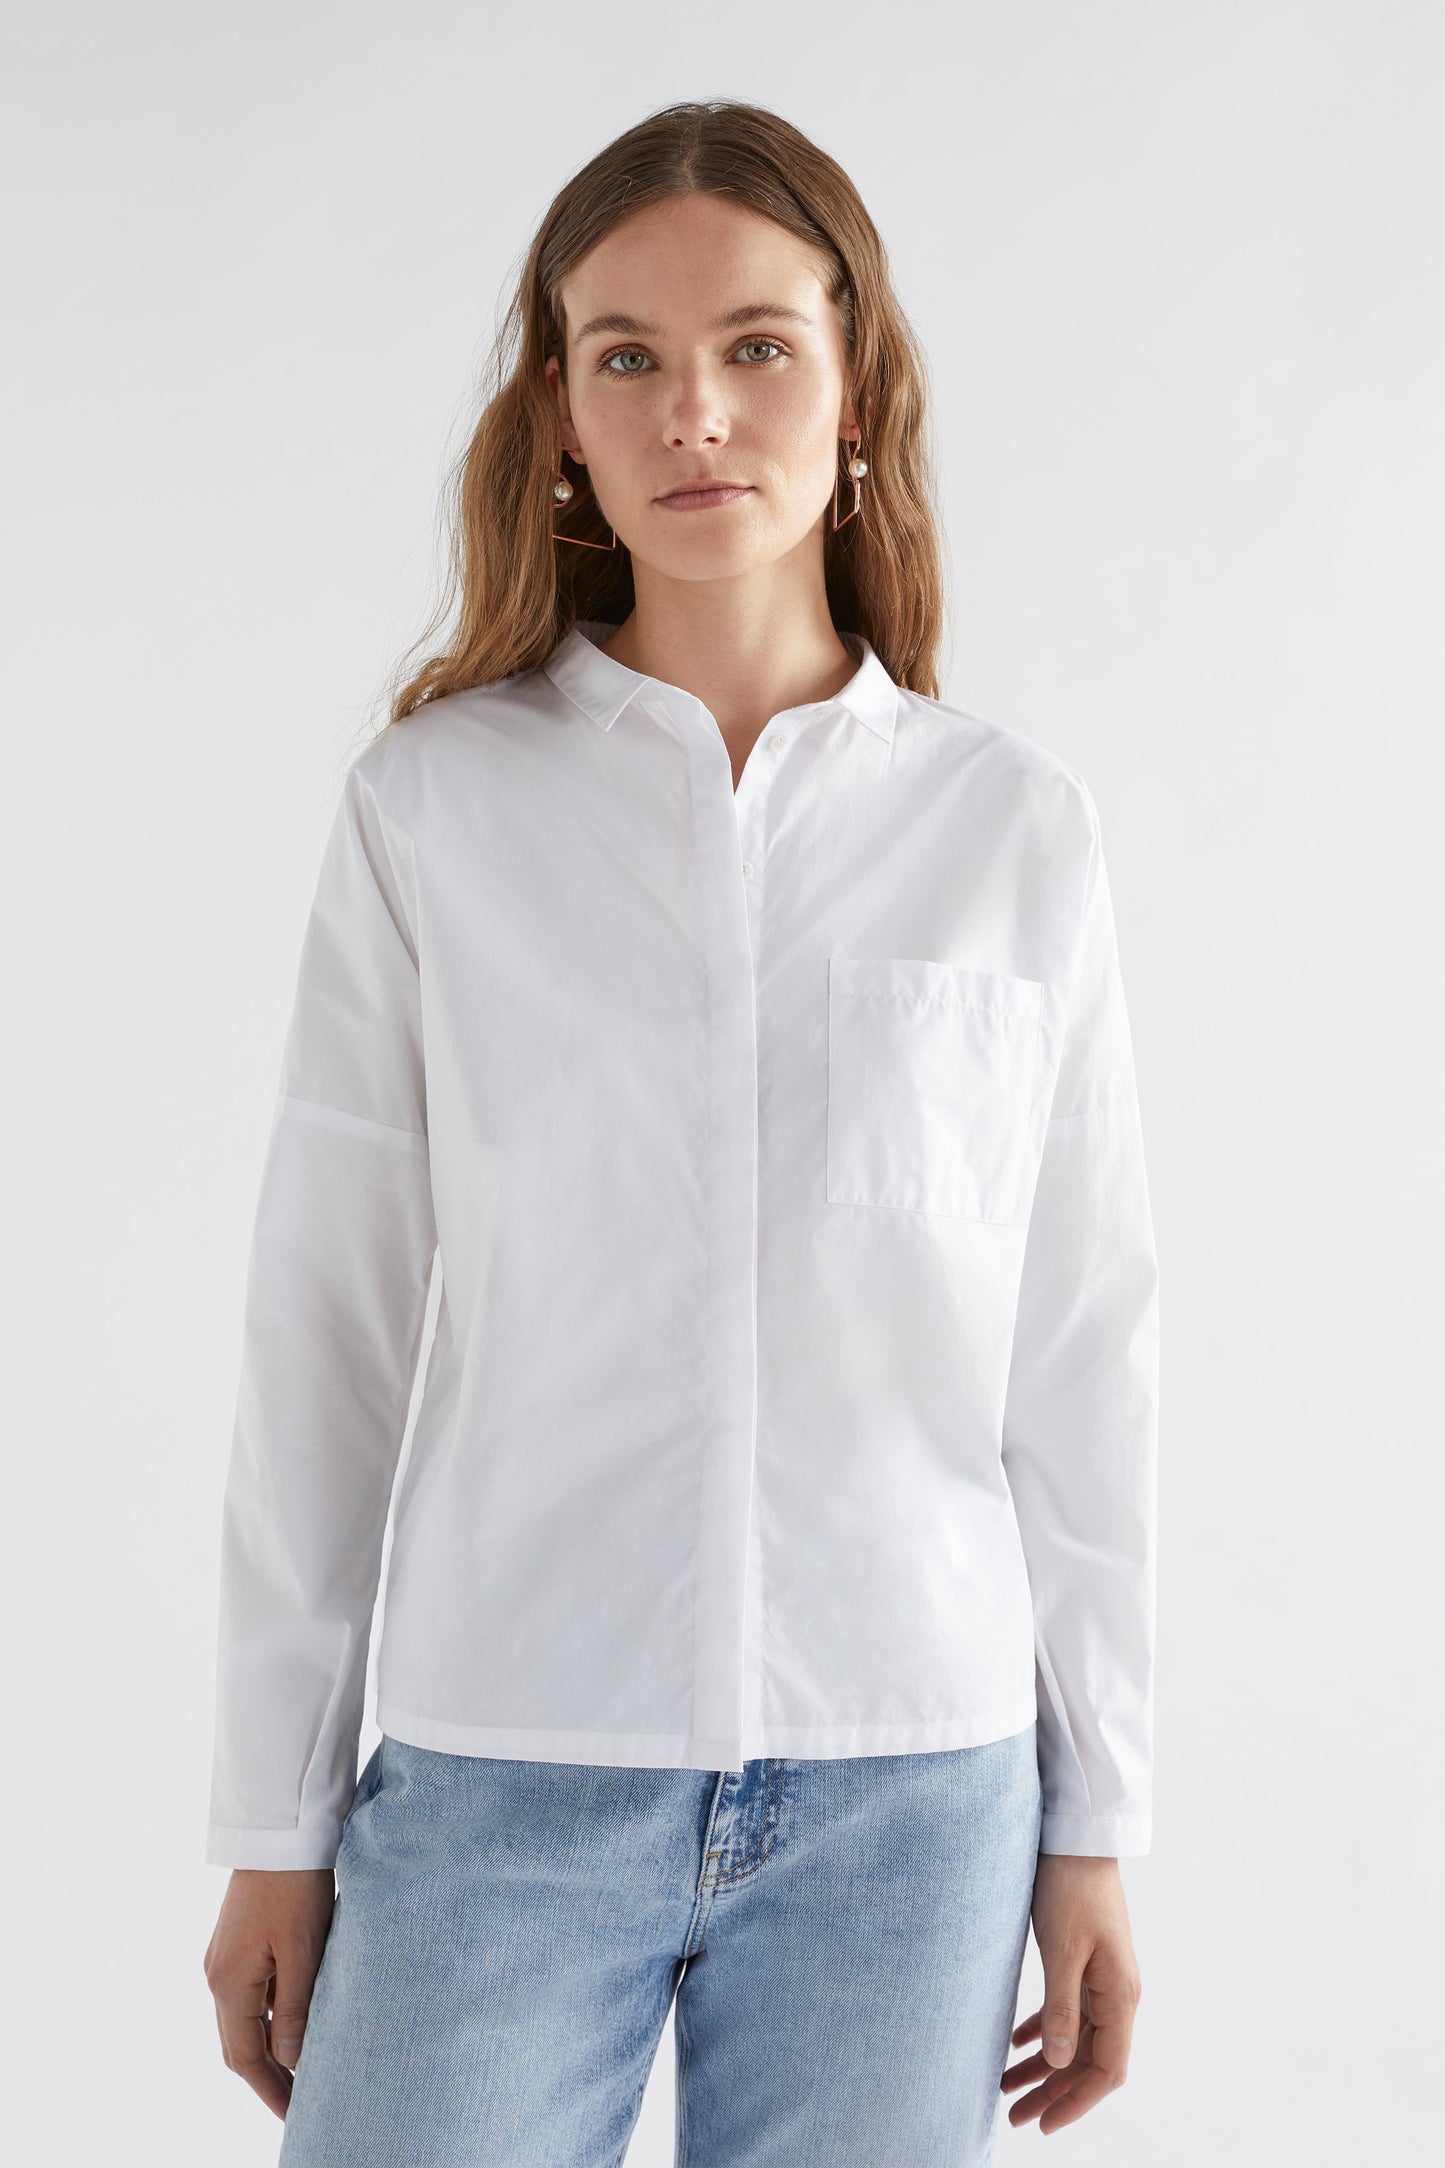 Rinna Organic Cotton White Everyday Shirt with Front Pocket Model Front Untucked | WHITE